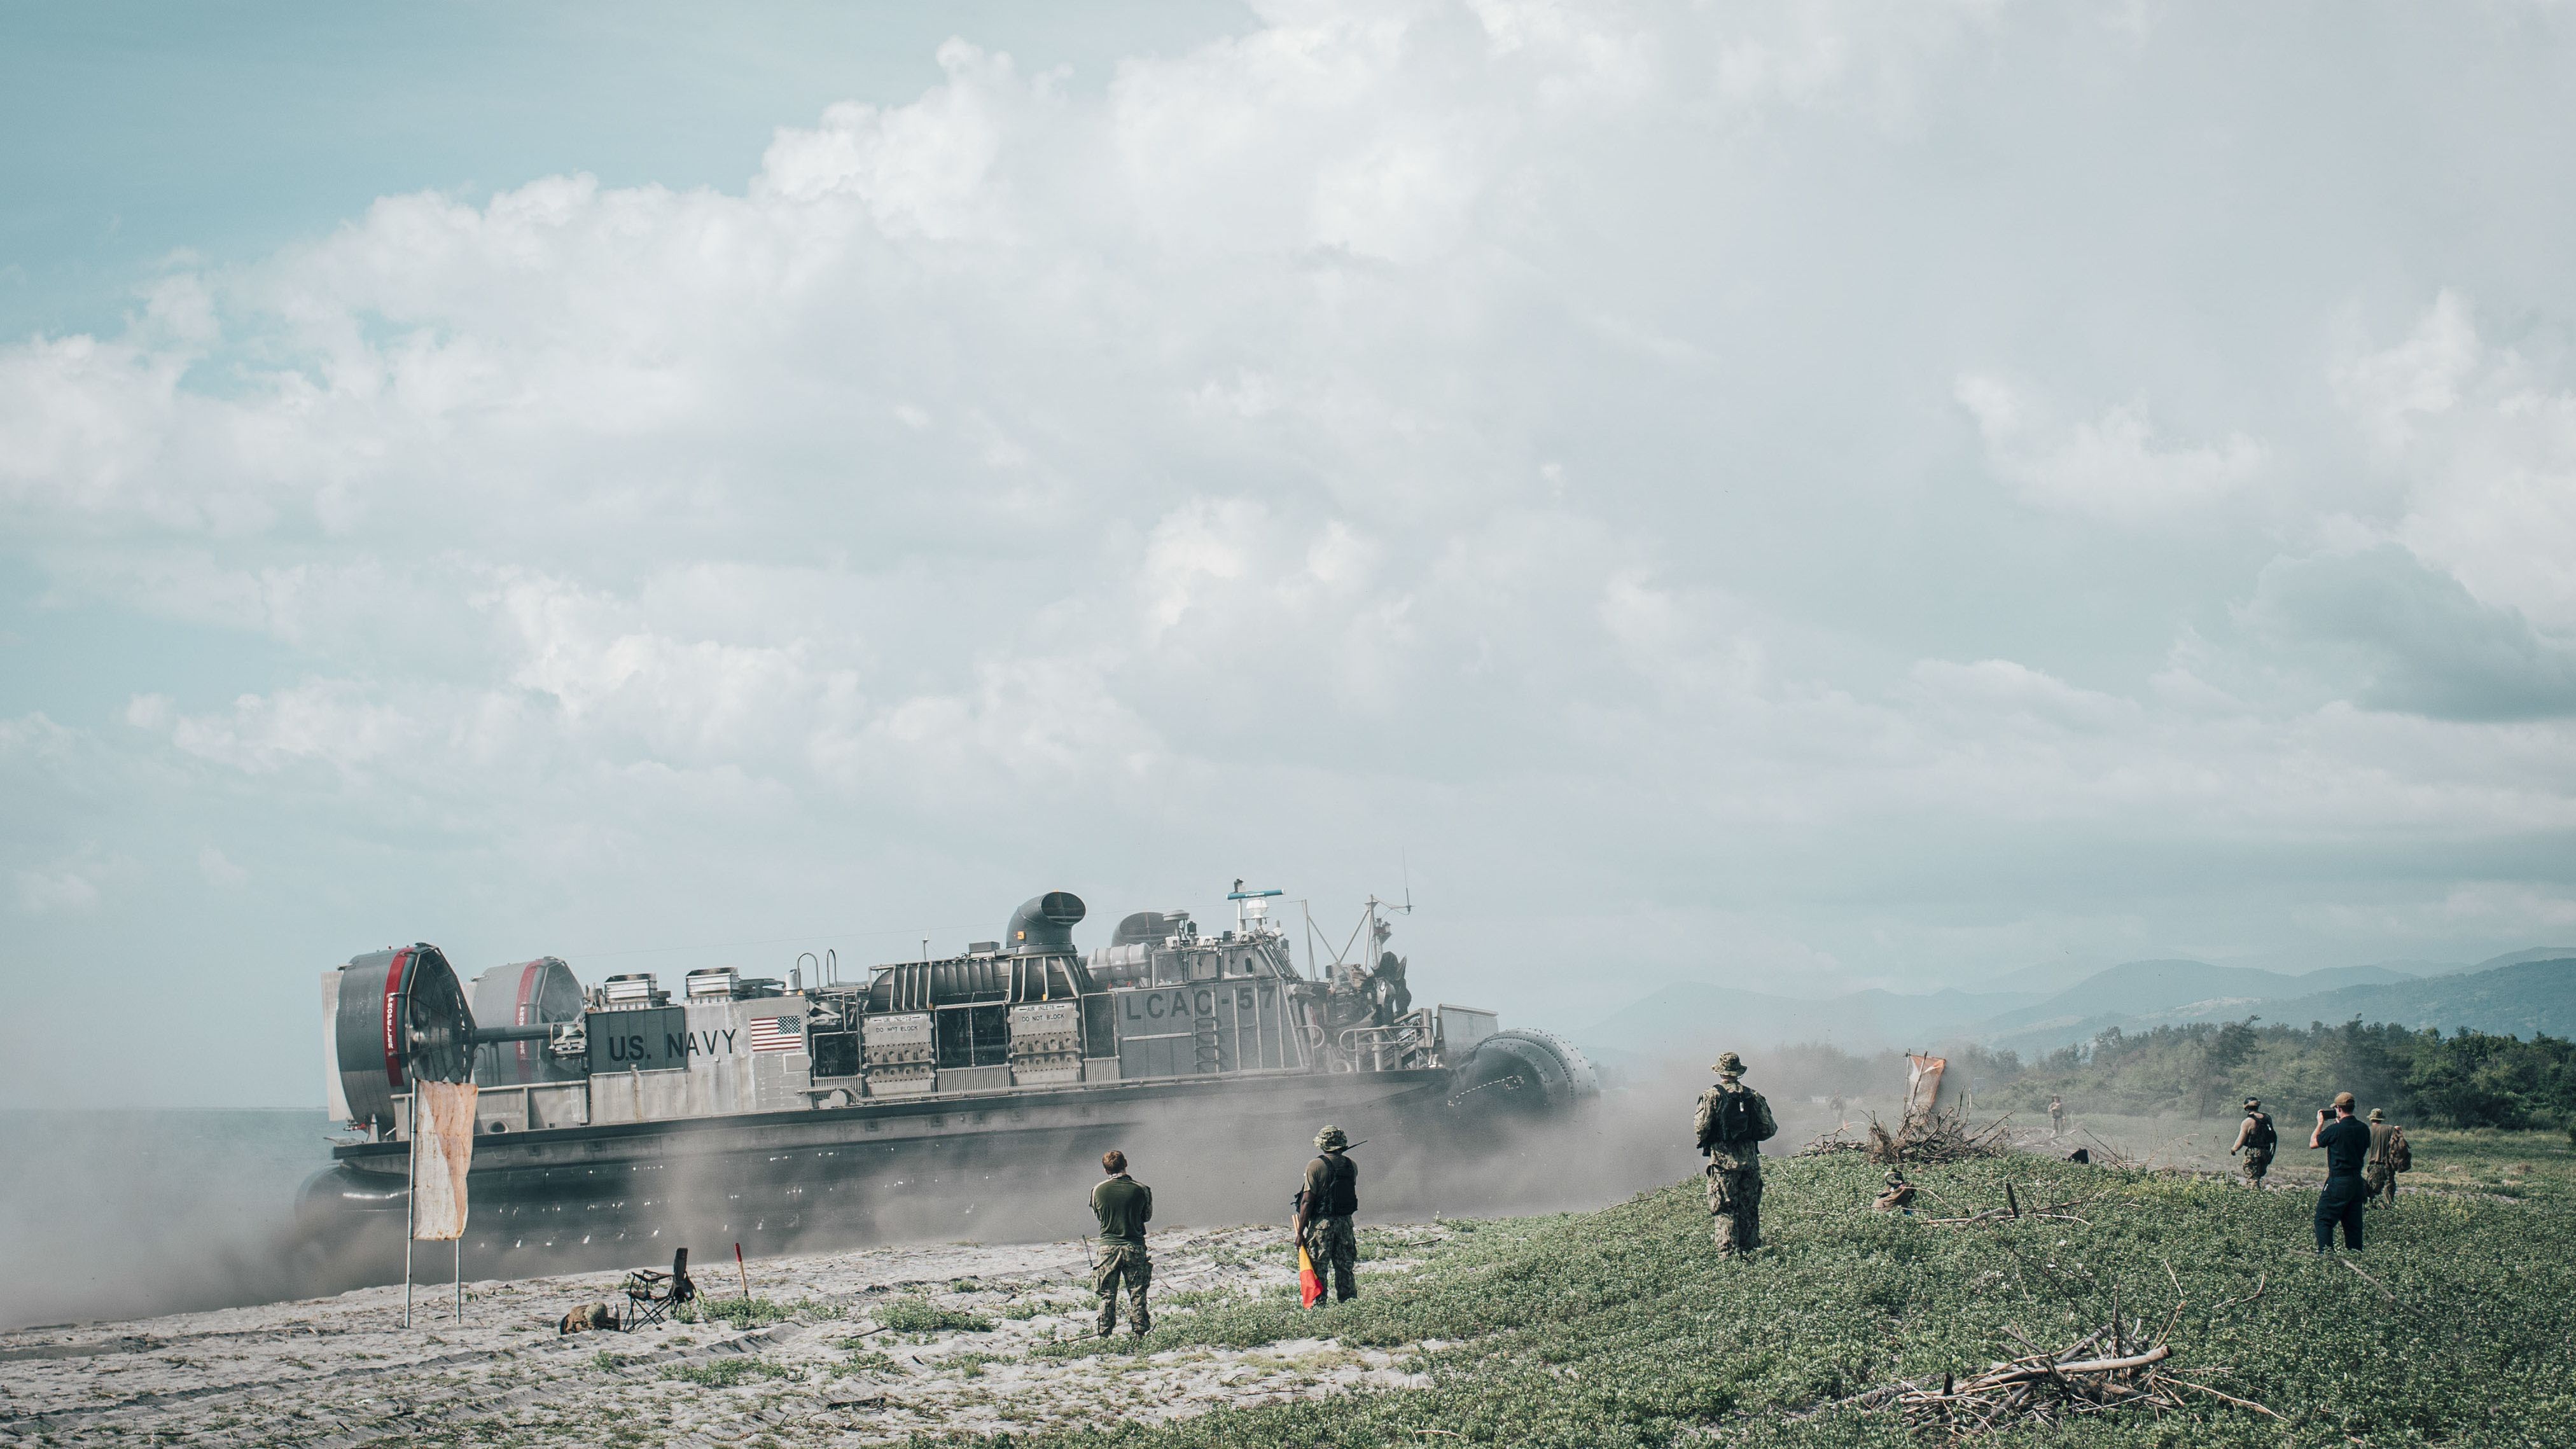 A US Navy landing craft brings US Marines ashore at the Naval Education Training Center, Philippines, during an amphibious offload in support of exercise KAMANDAG 3, Oct. 9, 2019.